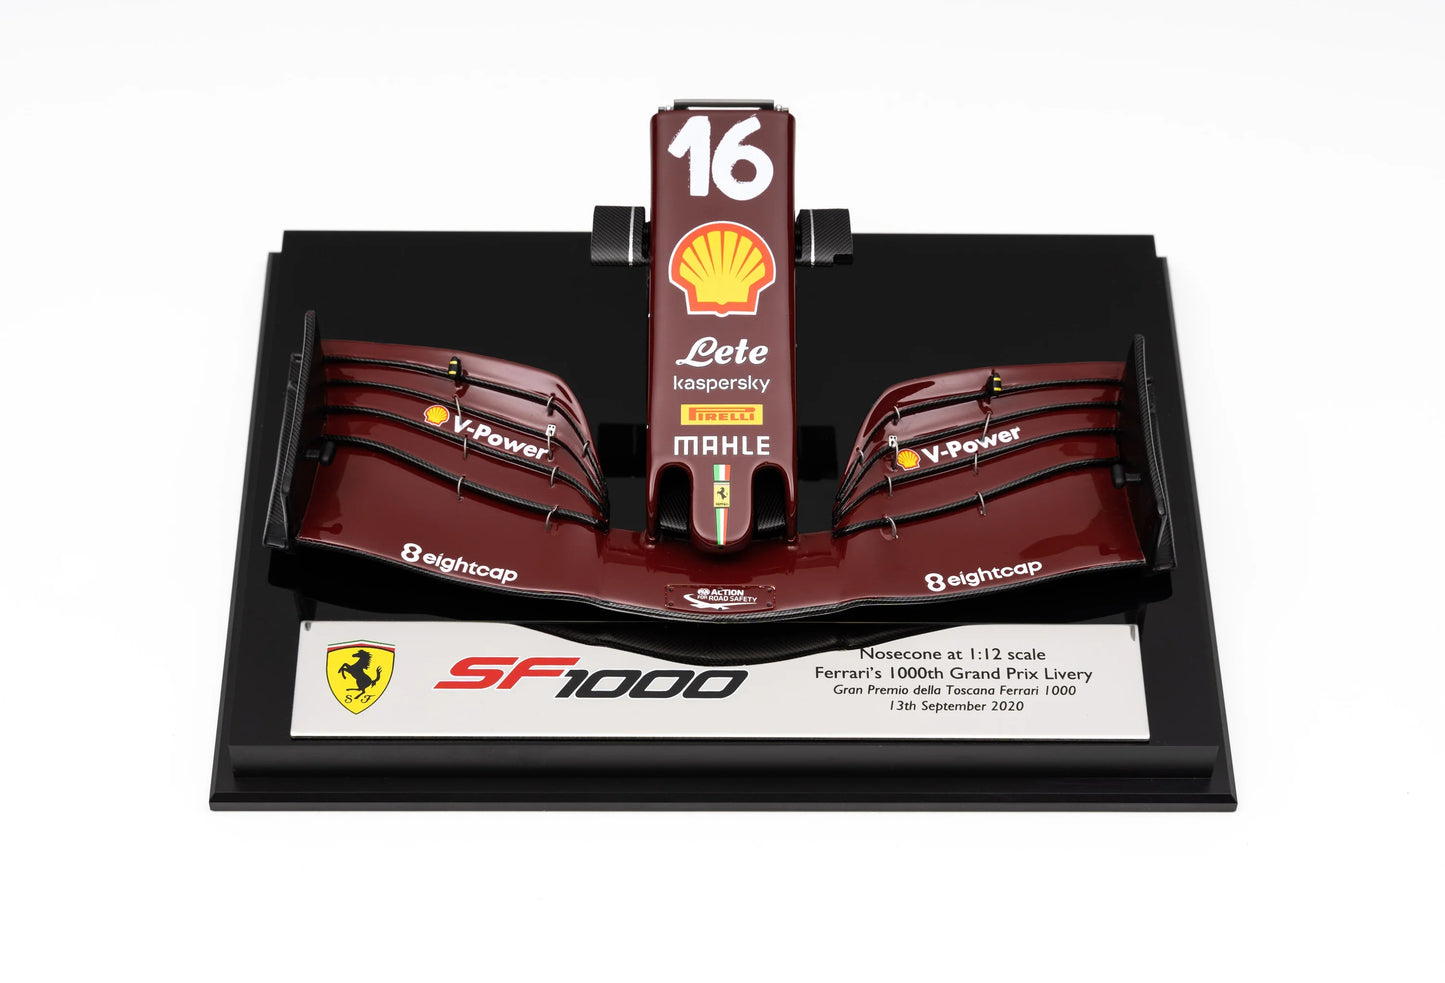 Amalgam Collection Ferrari SF1000 Charles Leclerc 1000th GP Livery (2020) 1:12 Model Nosecone | Detailed Collector's Edition, Precise Replica of Commemorative F1 Nosecone | 2Jour Concierge, #1 luxury high-end gift & lifestyle shop